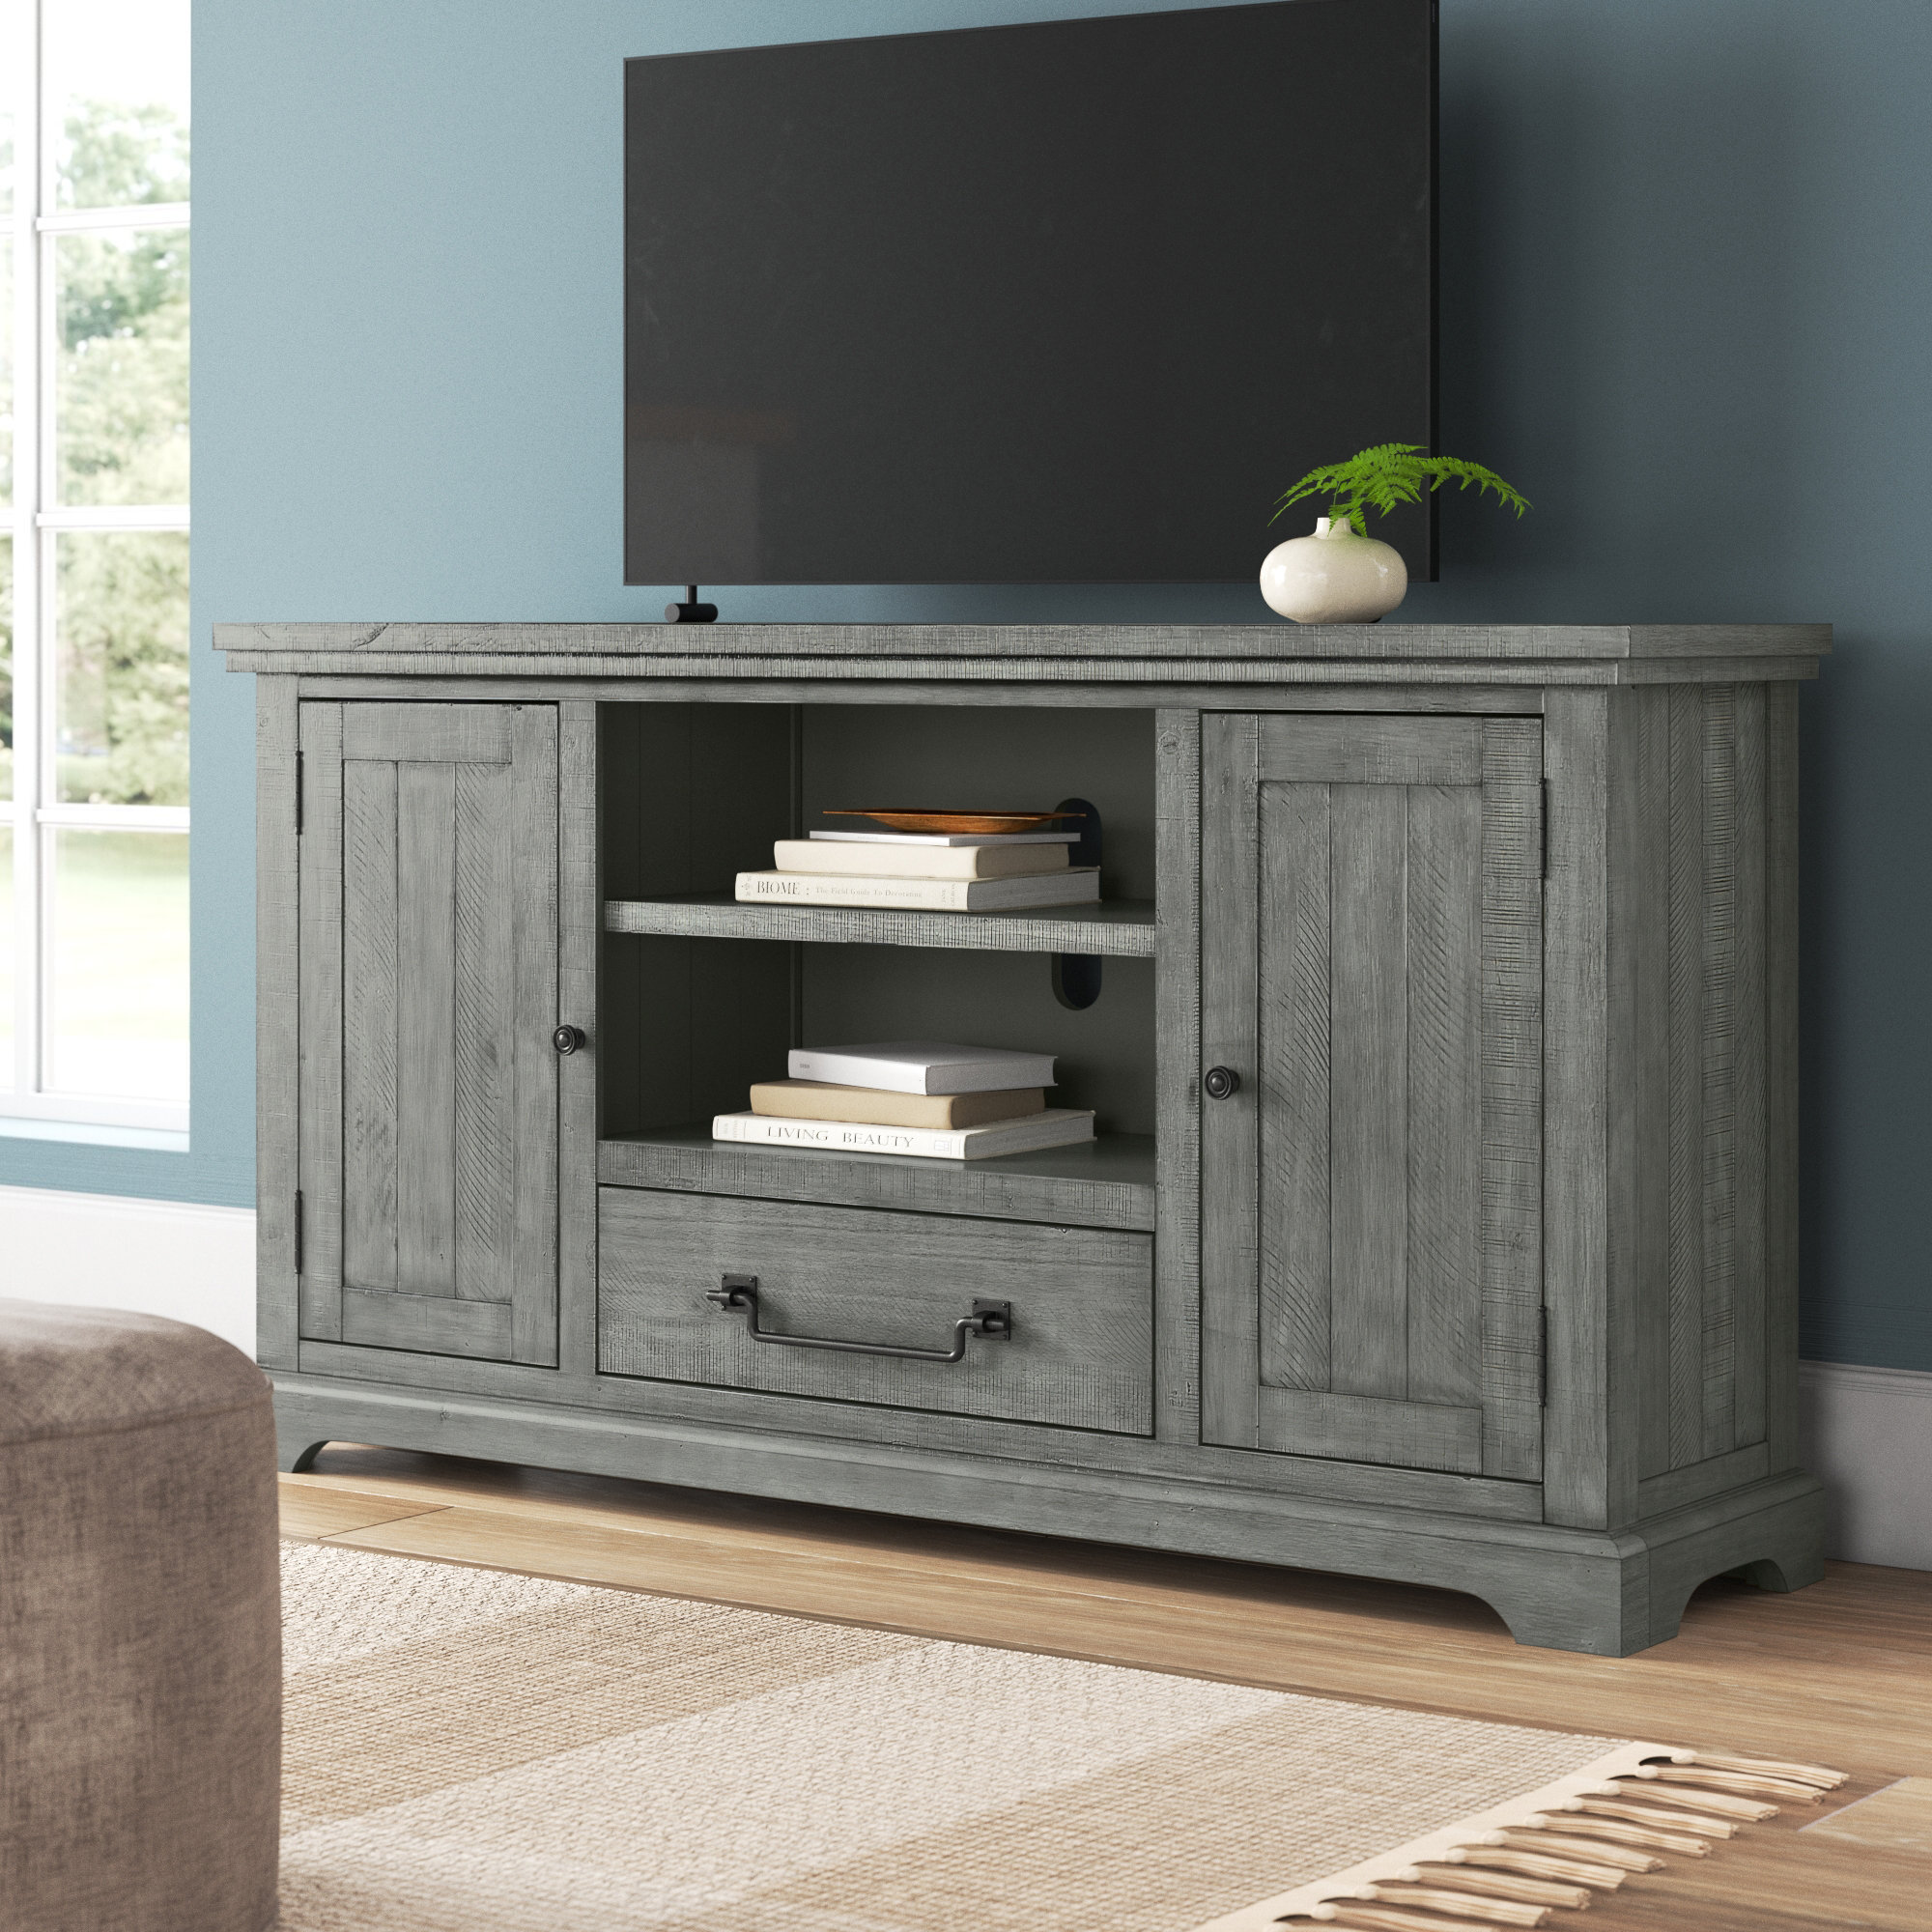 Laurel Foundry Modern Farmhouse & Solid Wayfair | TVs up to Reviews TV Wood Hoddesd Stand for 65